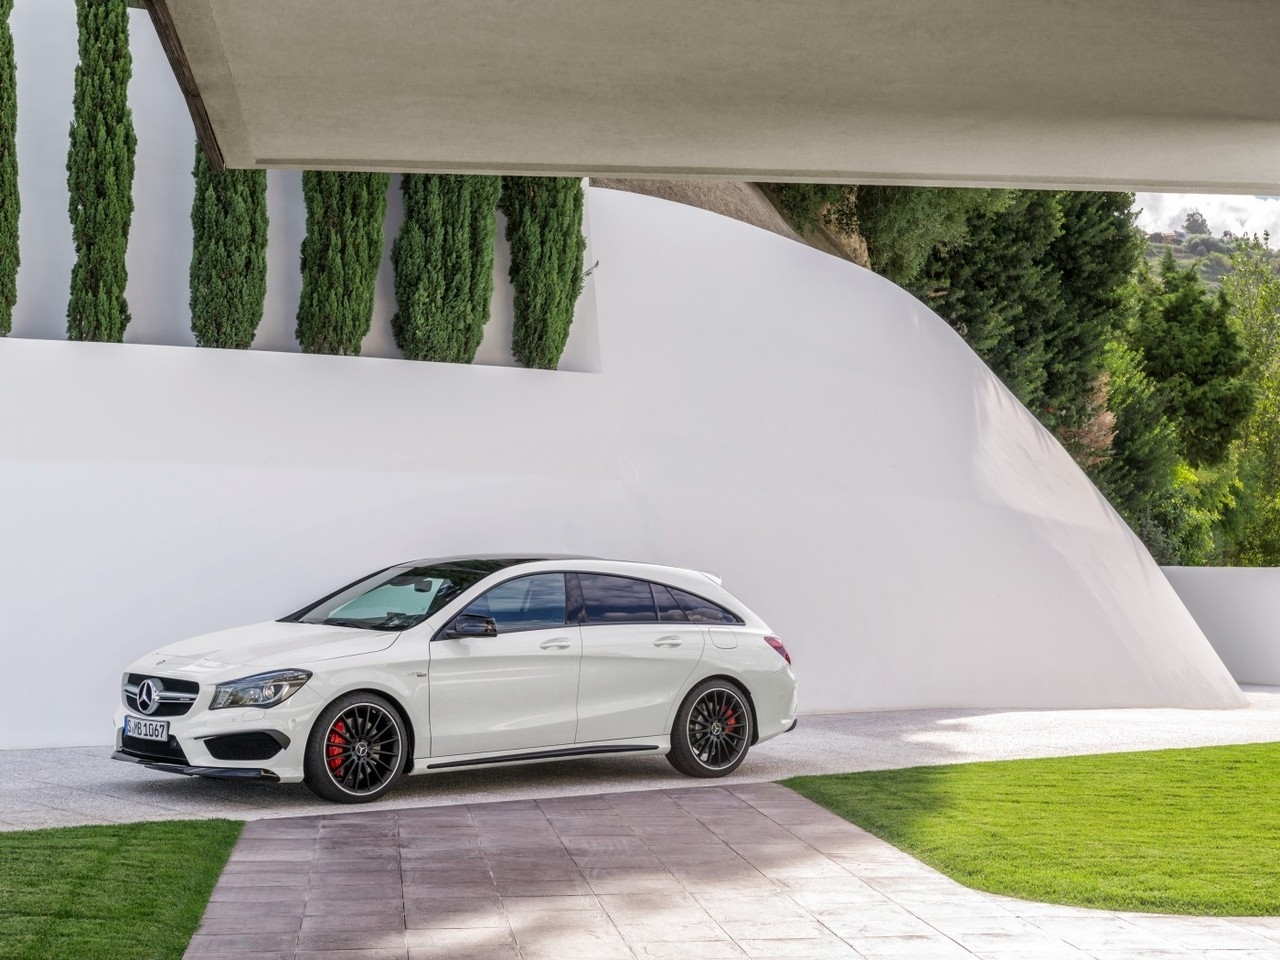 Mercedes CLA 45 AMG 2015 for 1280 x 960 resolution